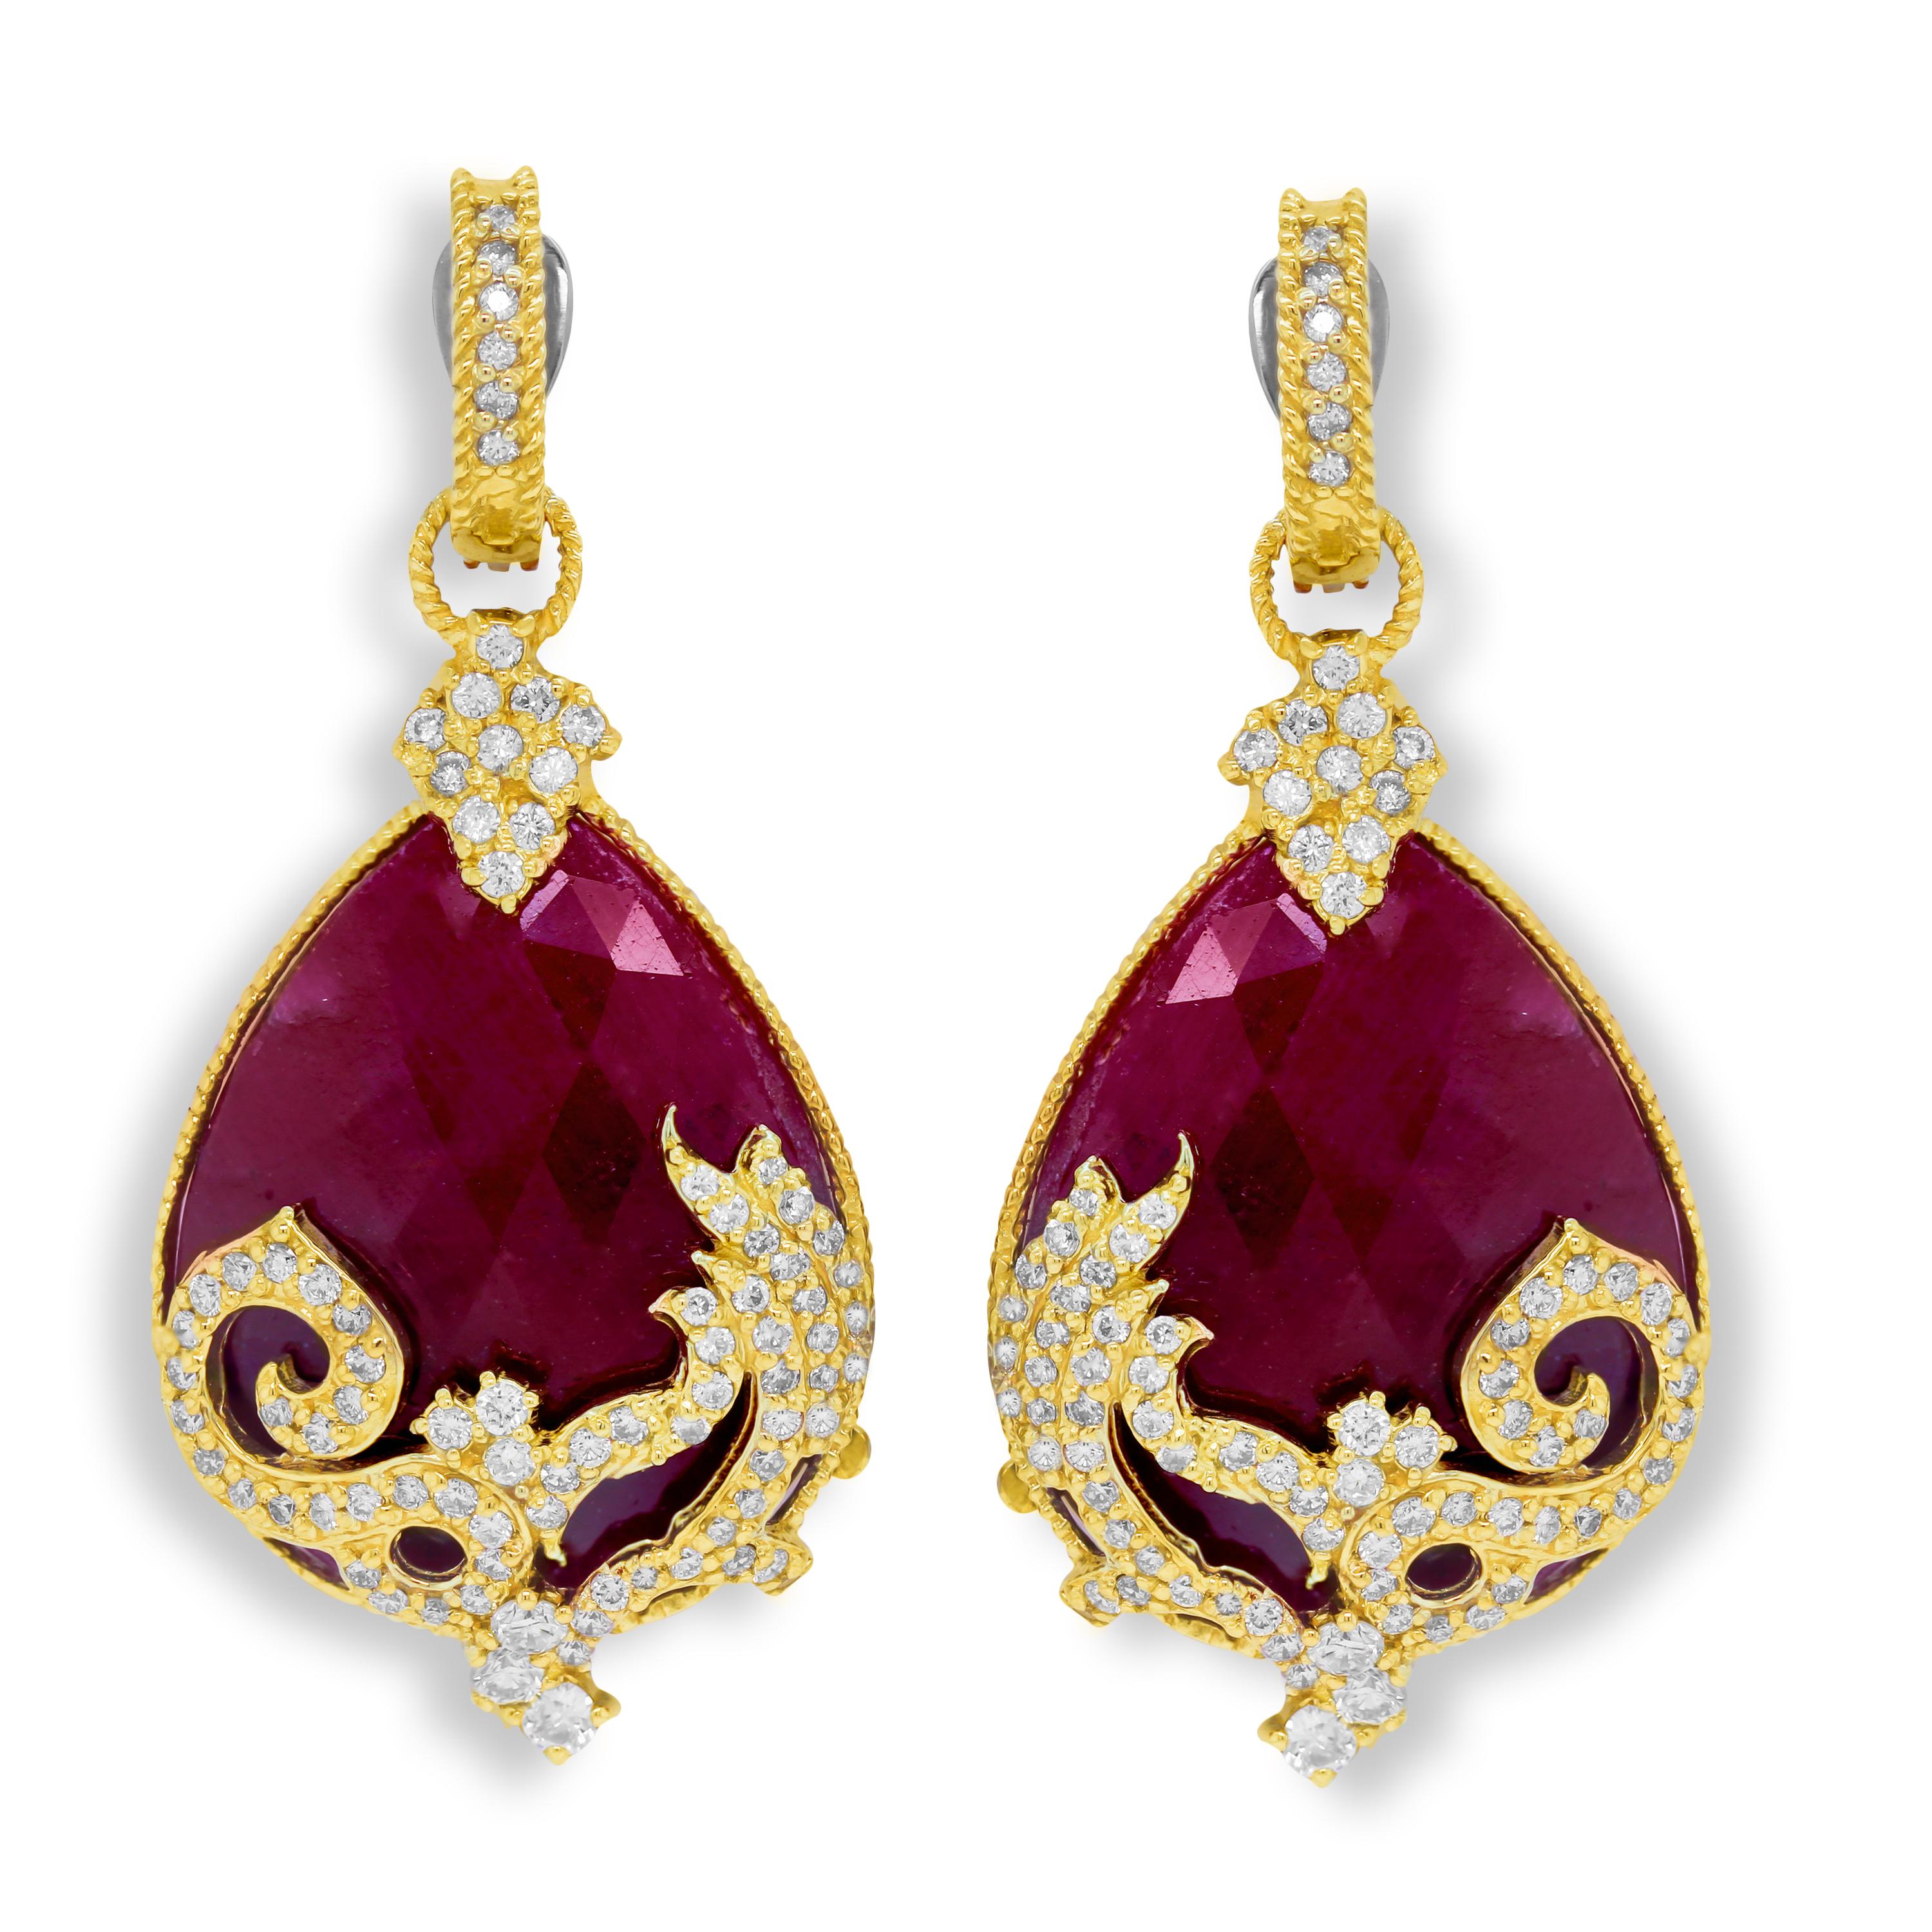 Rose Cut Stambolian 18K Gold and Diamond Drop Dangle Earrings with Sliced Ruby